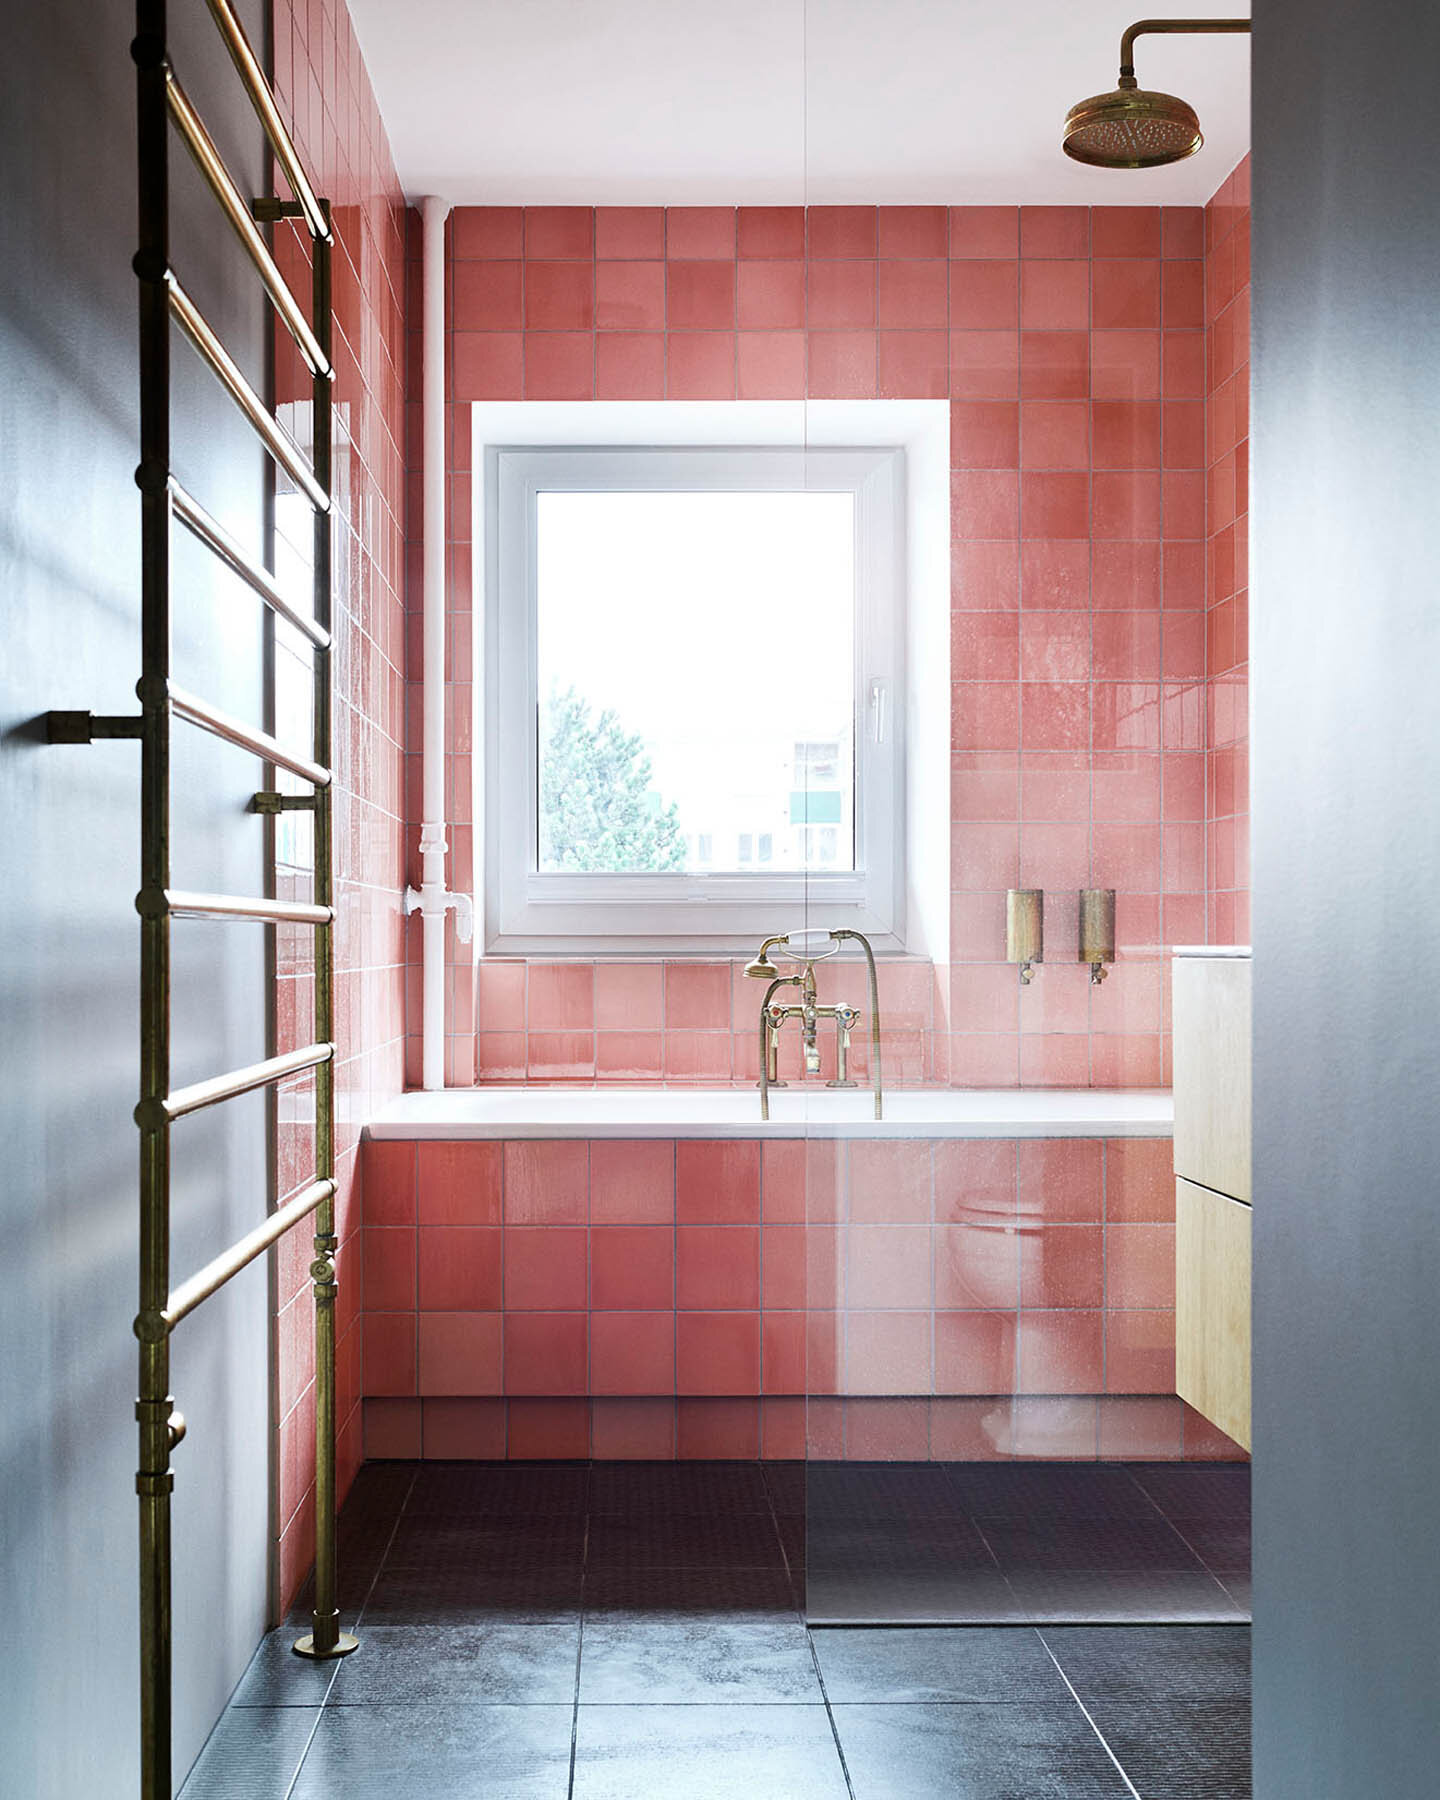 Wall and bathtub with clay tiles in format 15x15x1 cm glazed with 'Coral red Shiny Crystal'